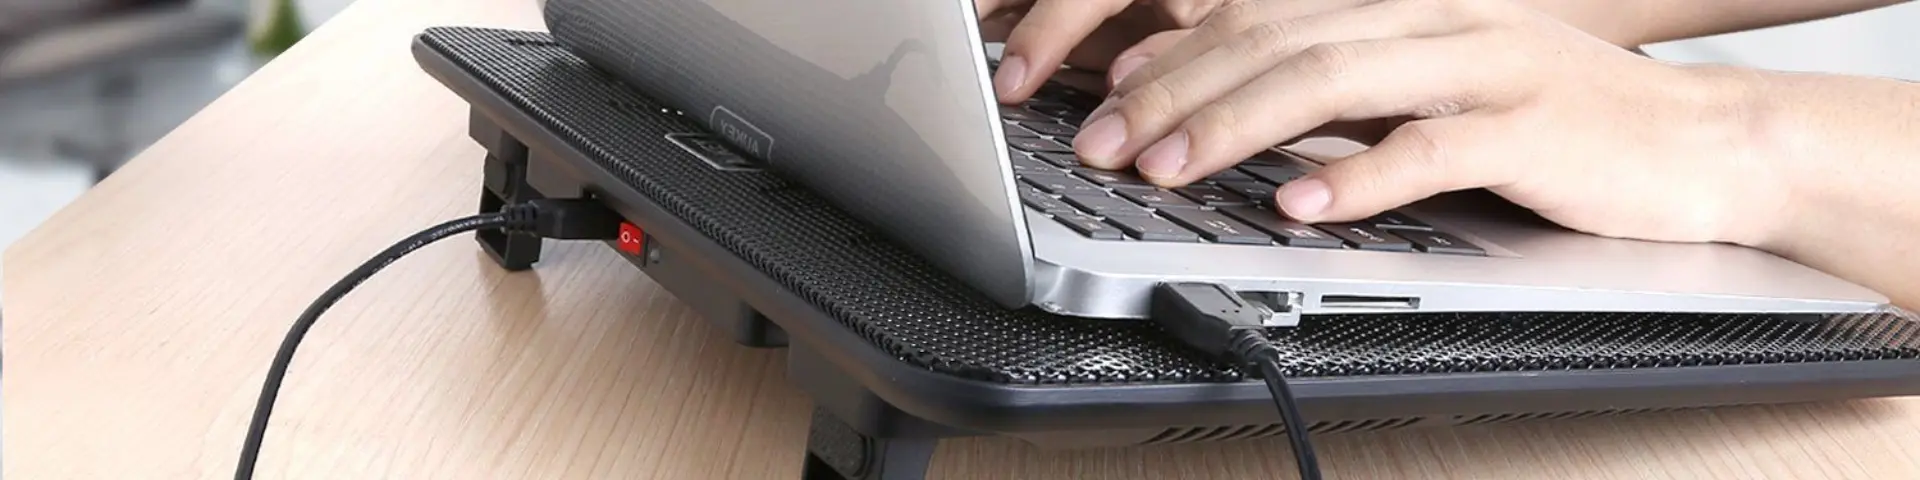 How to choose a laptop pad